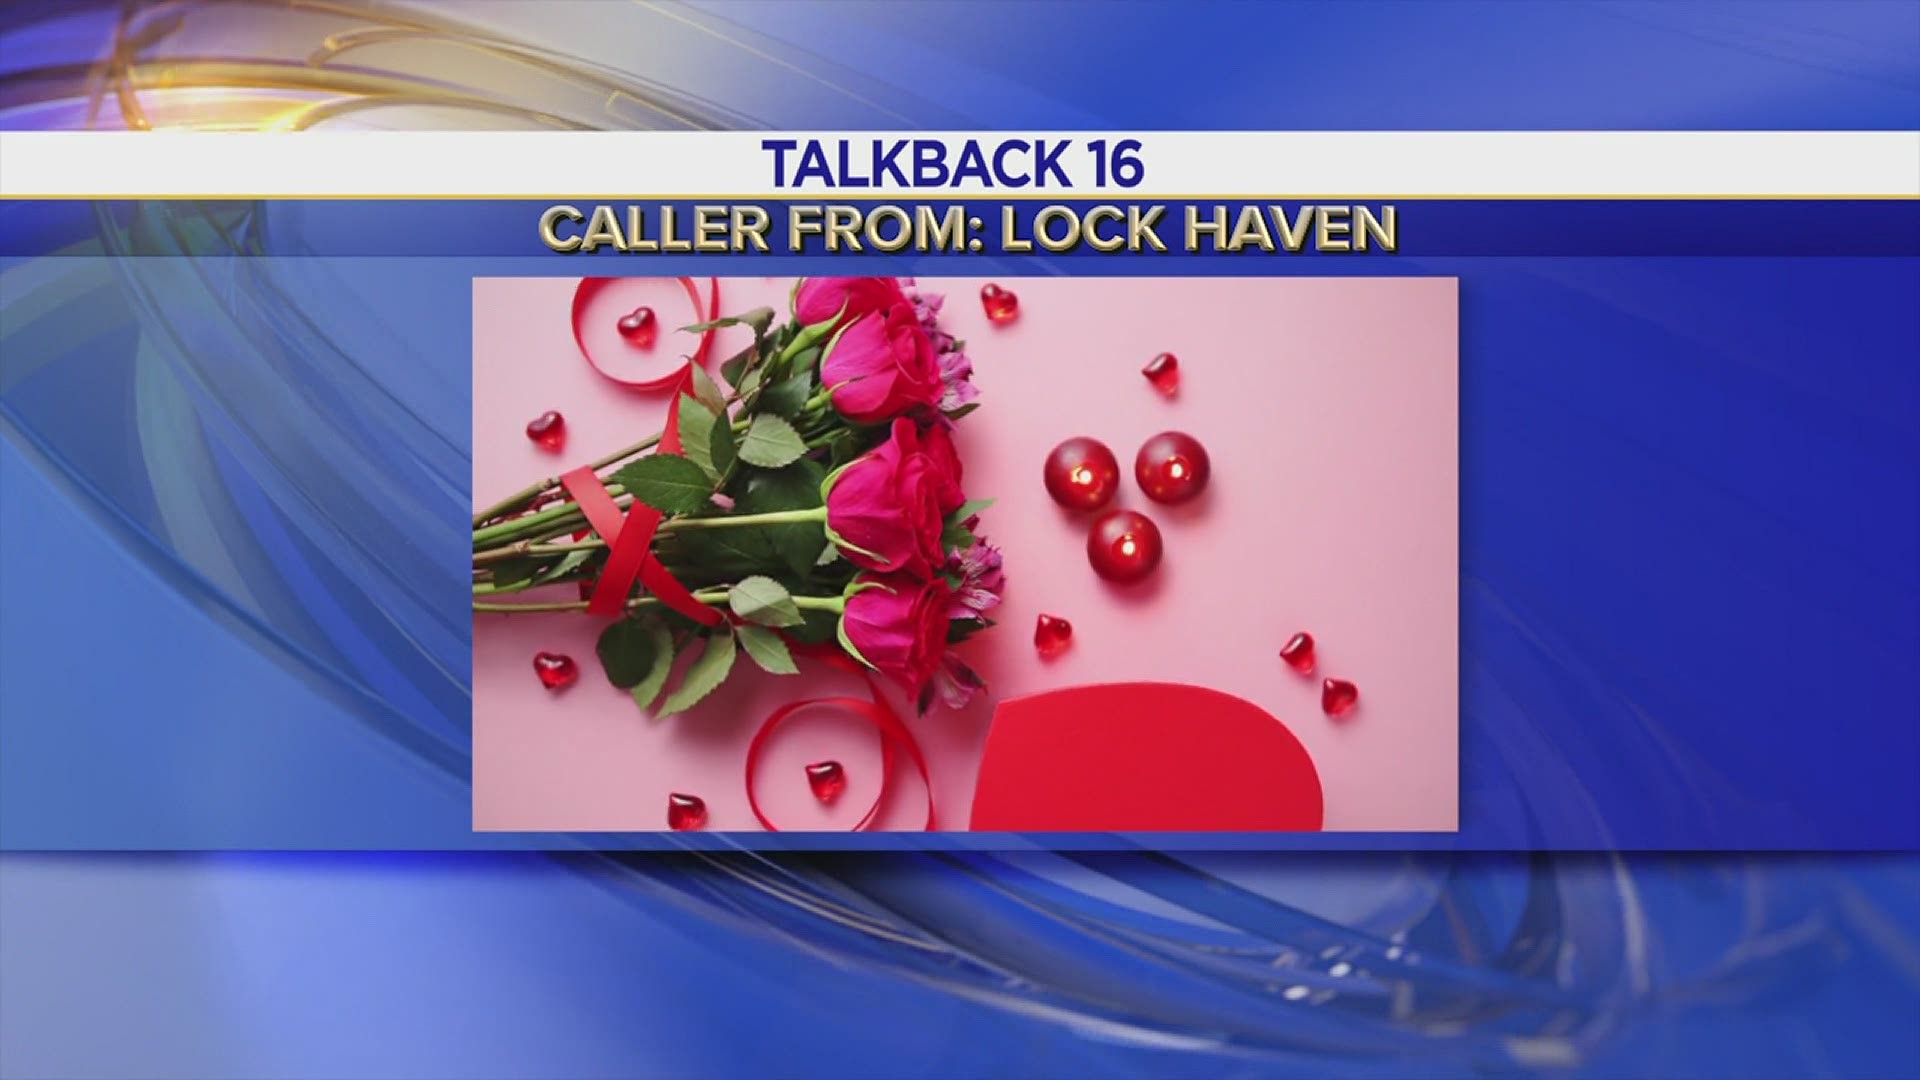 Viewers react to a call from Tuesday's Talkback segment and give comments on Valentine's Day.